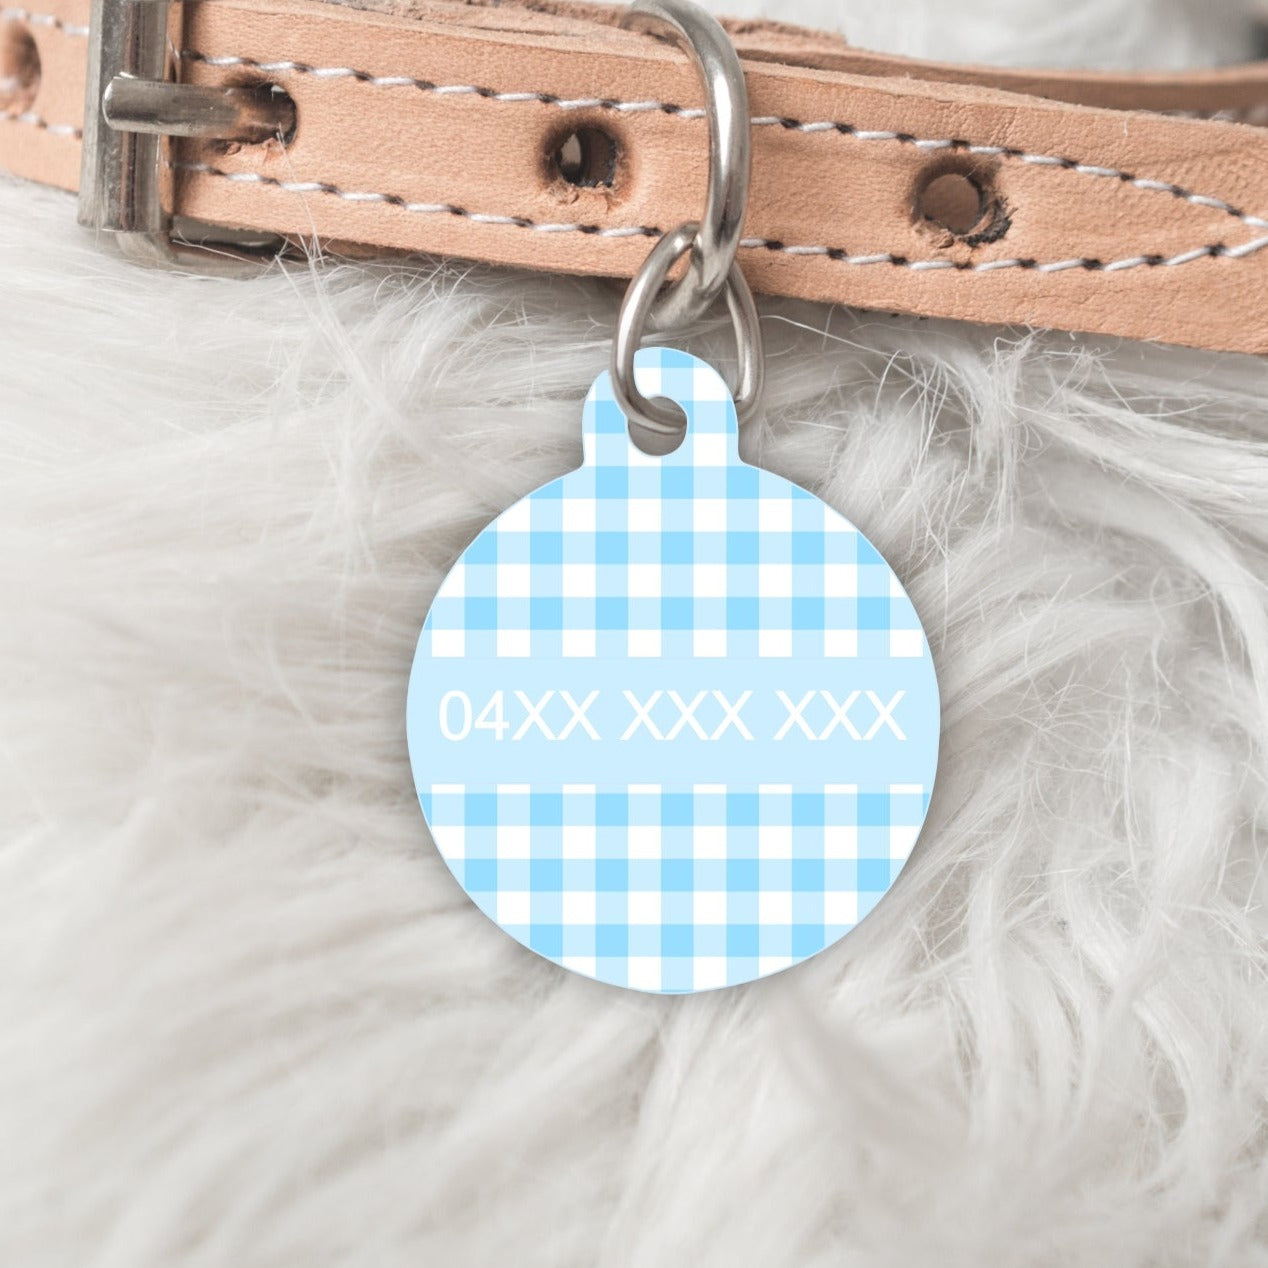 Sky Blue Gingham Personalised Pet dog or cat ID Tag